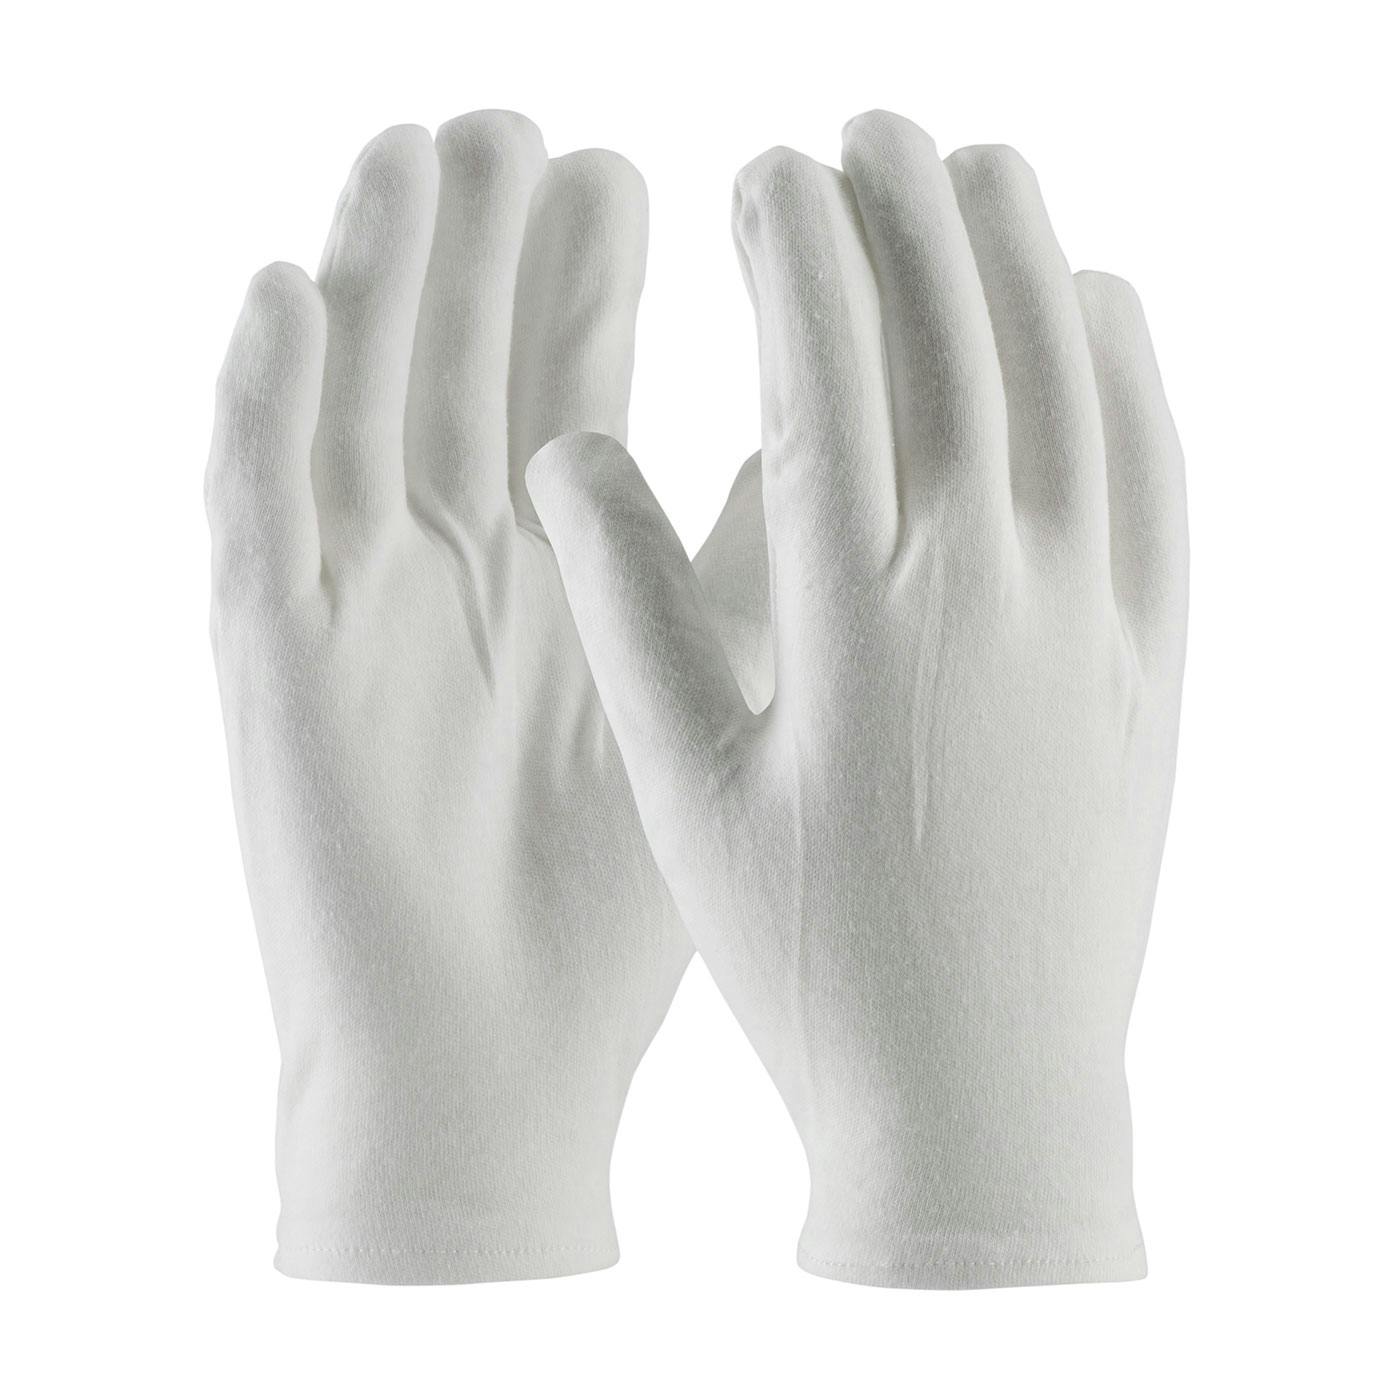 Heavy Weight Cotton Lisle Inspection Glove with Rolled Hem Cuff - Men's, White (97-540R) - MENS_0